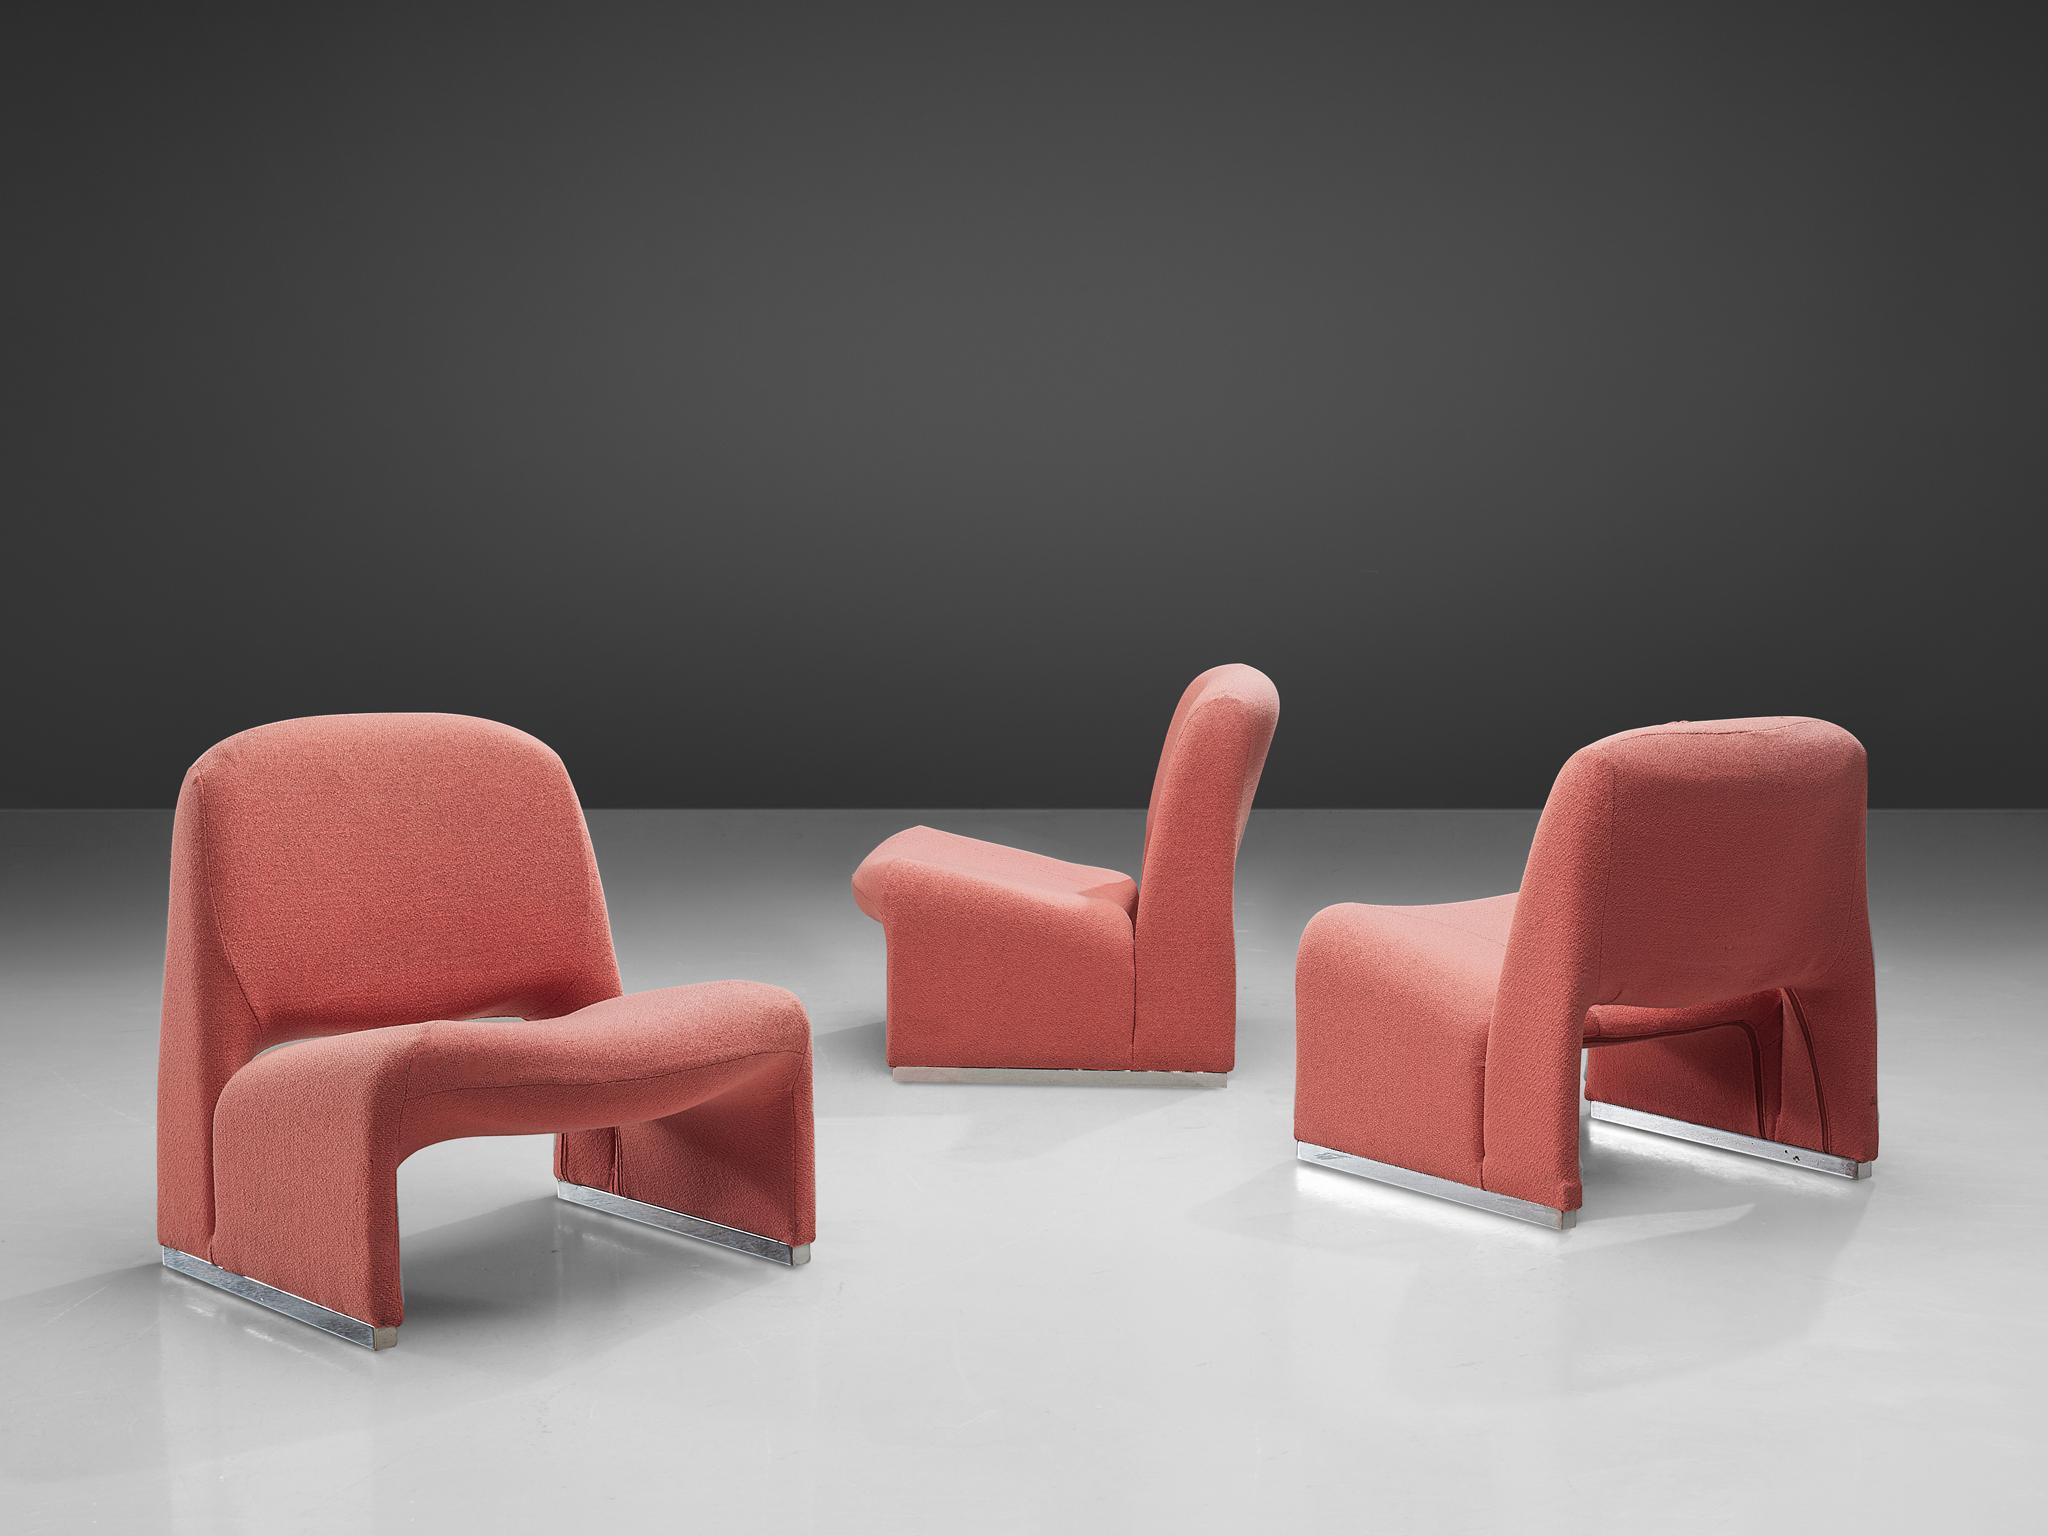 Easy chairs, metal and pink fabric, Italy, 1970s

A wonderful Postmodern easy chair with bulky, fluid shapes. It consists of two curved parts that form together the legs, the seat and the backrest.  The legs are finished with an aluminum base. This